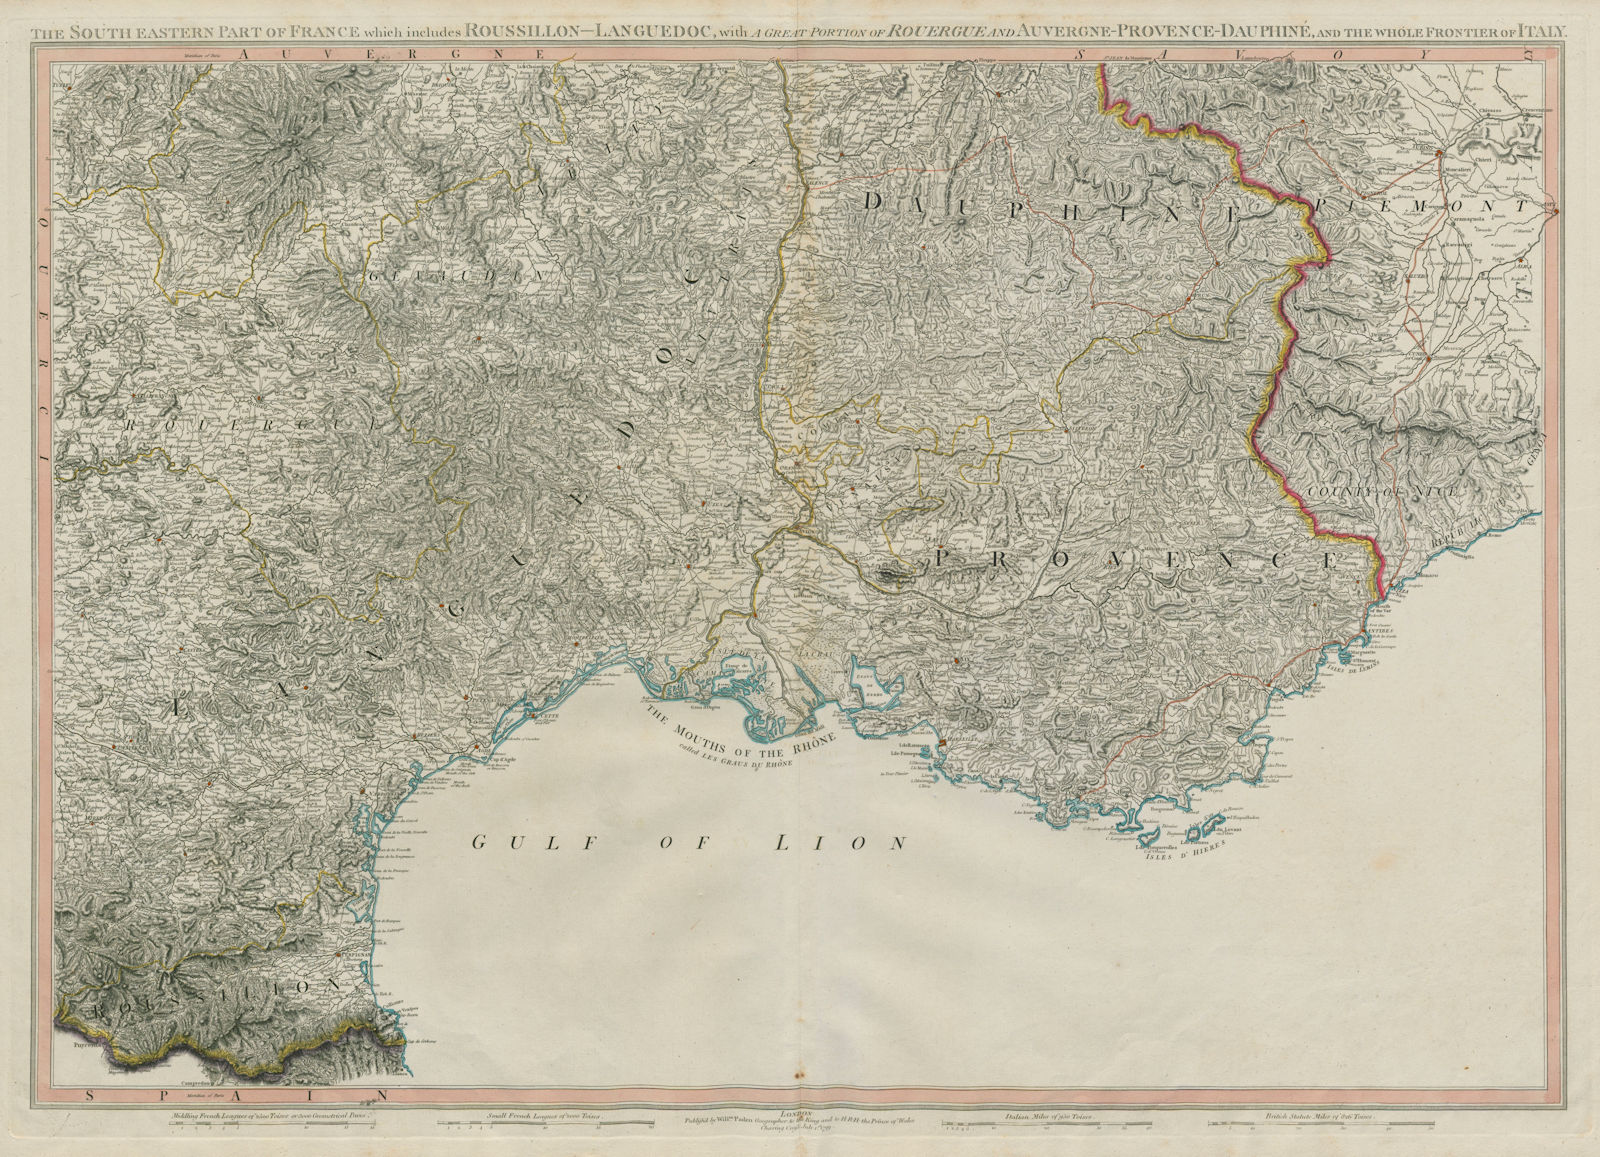 Associate Product The south eastern part of France which includes Roussillon… FADEN 1799 old map